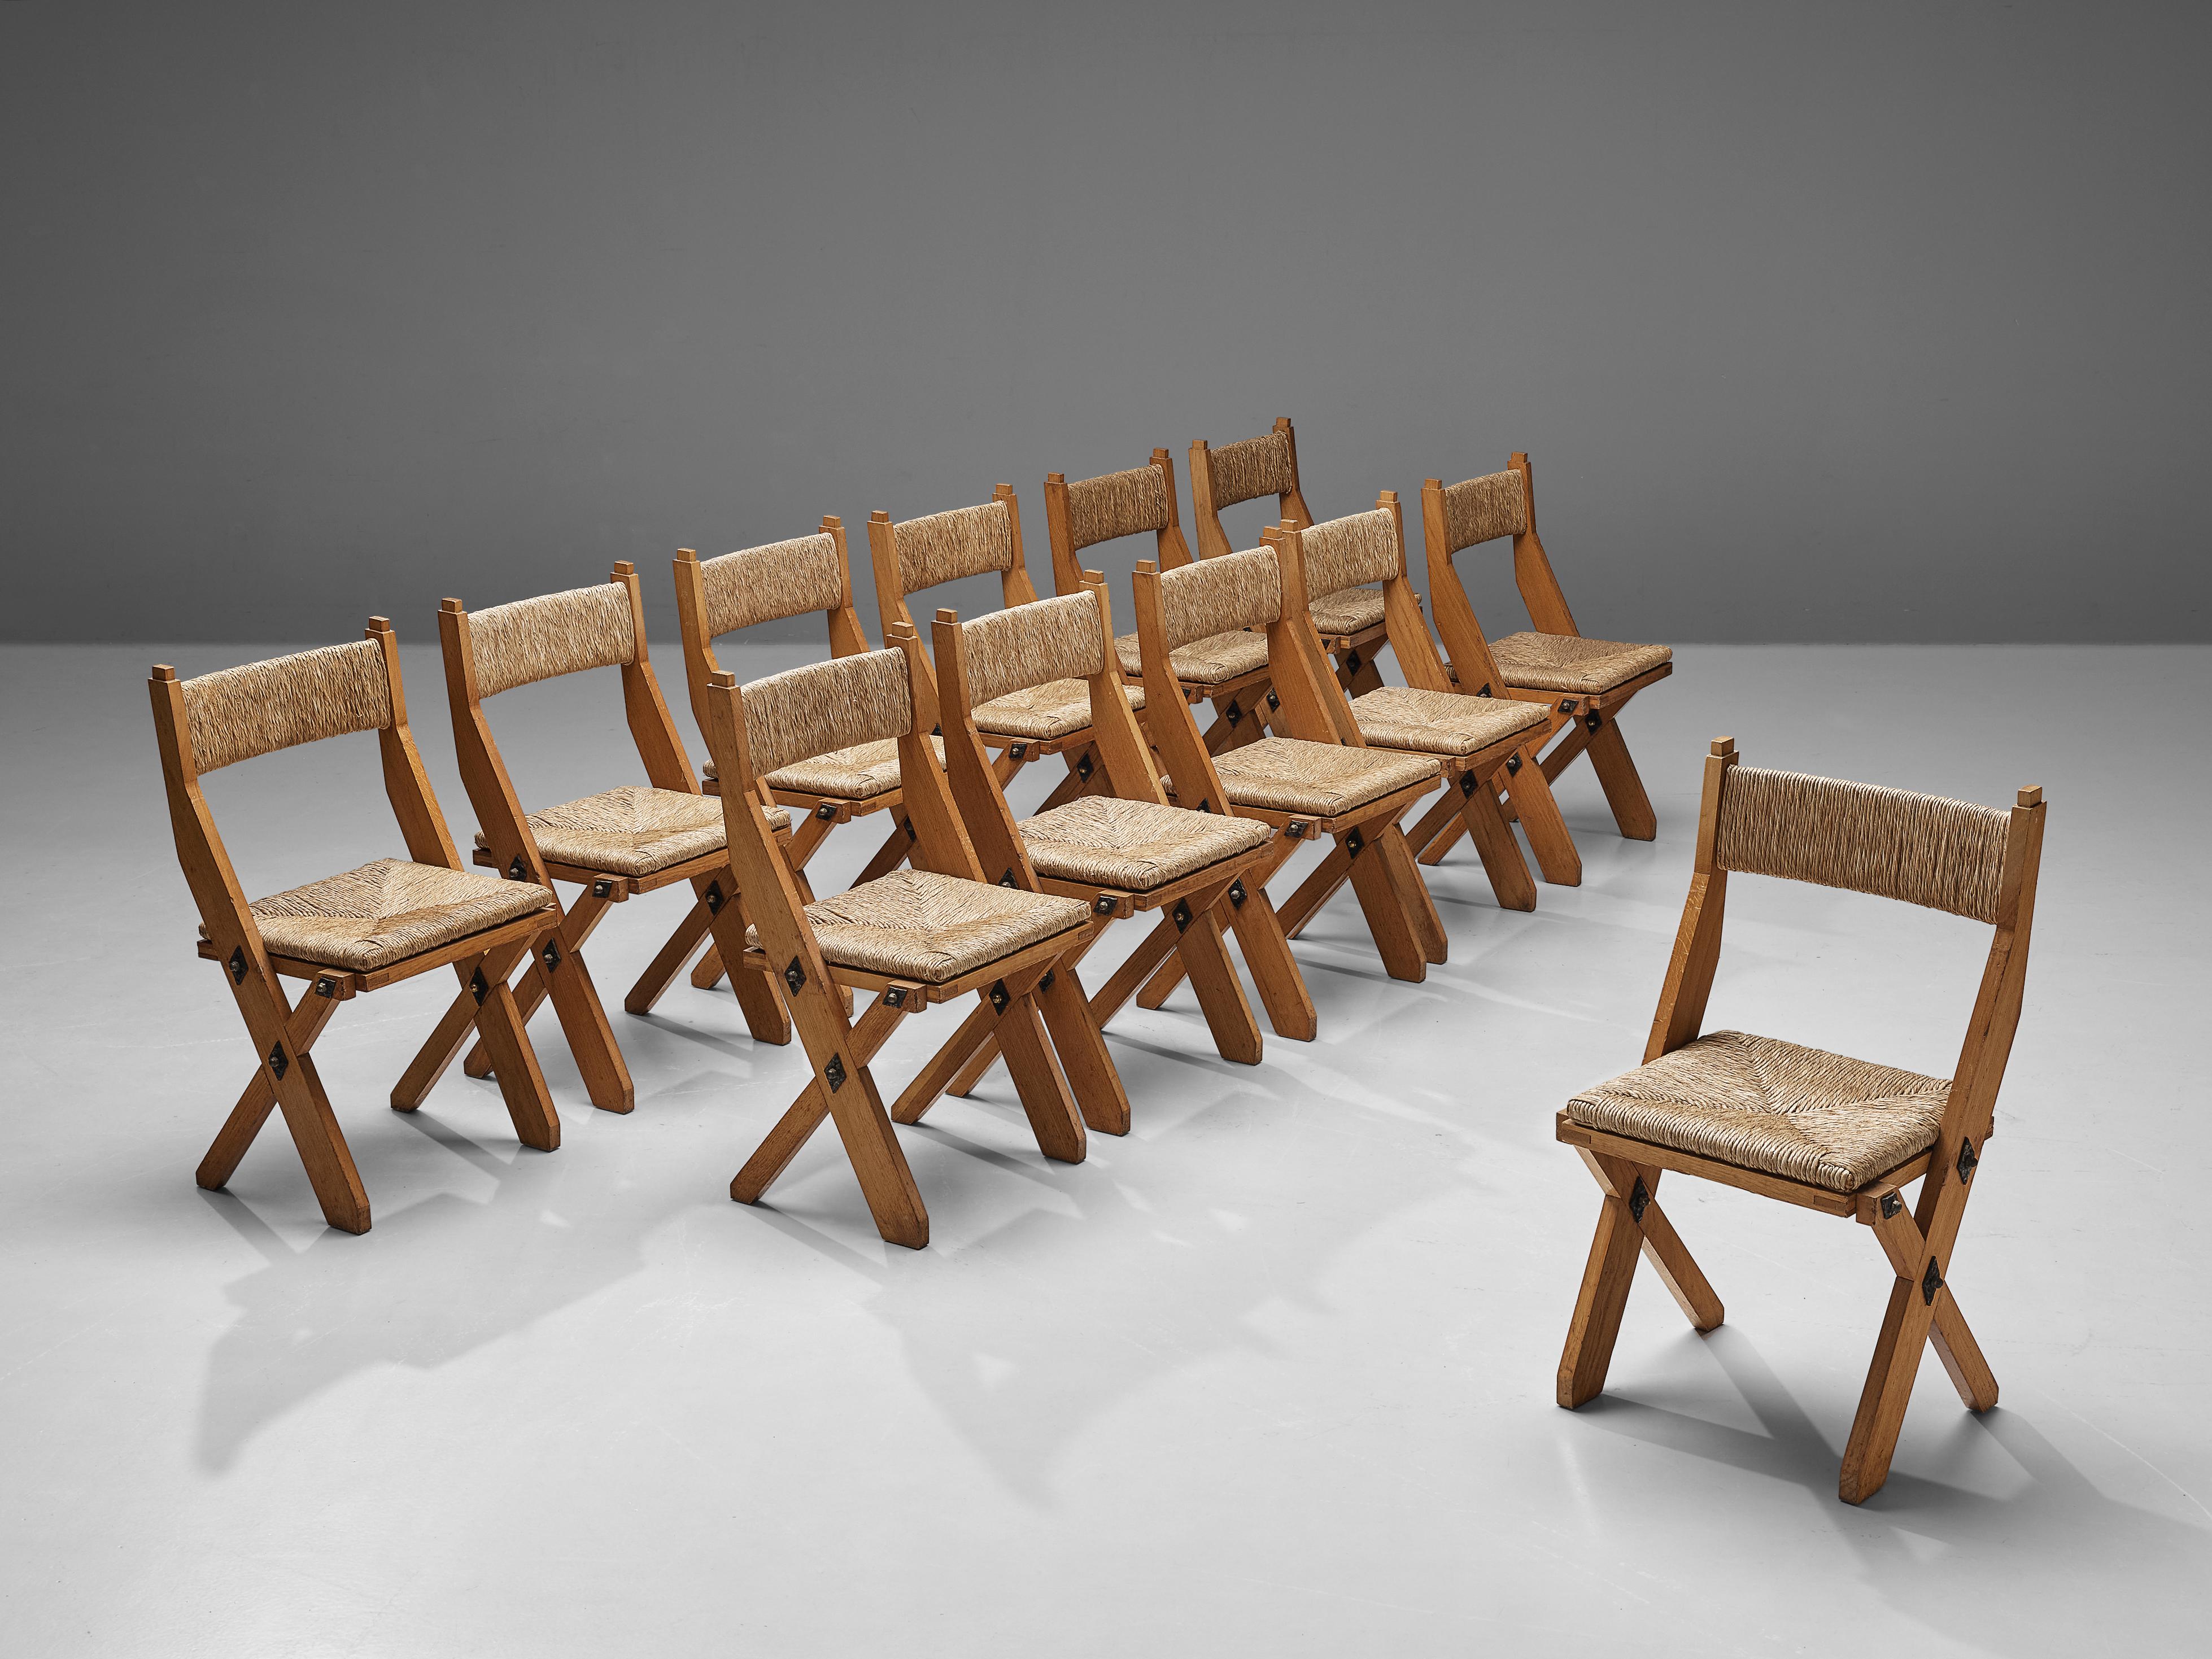 Dining chairs, oak, metal, brass, straw, Italy, 1970s.

Brutalist set of twelve chairs from Italy with a strict, sturdy design. The chairs are executed in thick slats of oak wood. The seat is made of straw and combines beautifully with the oak